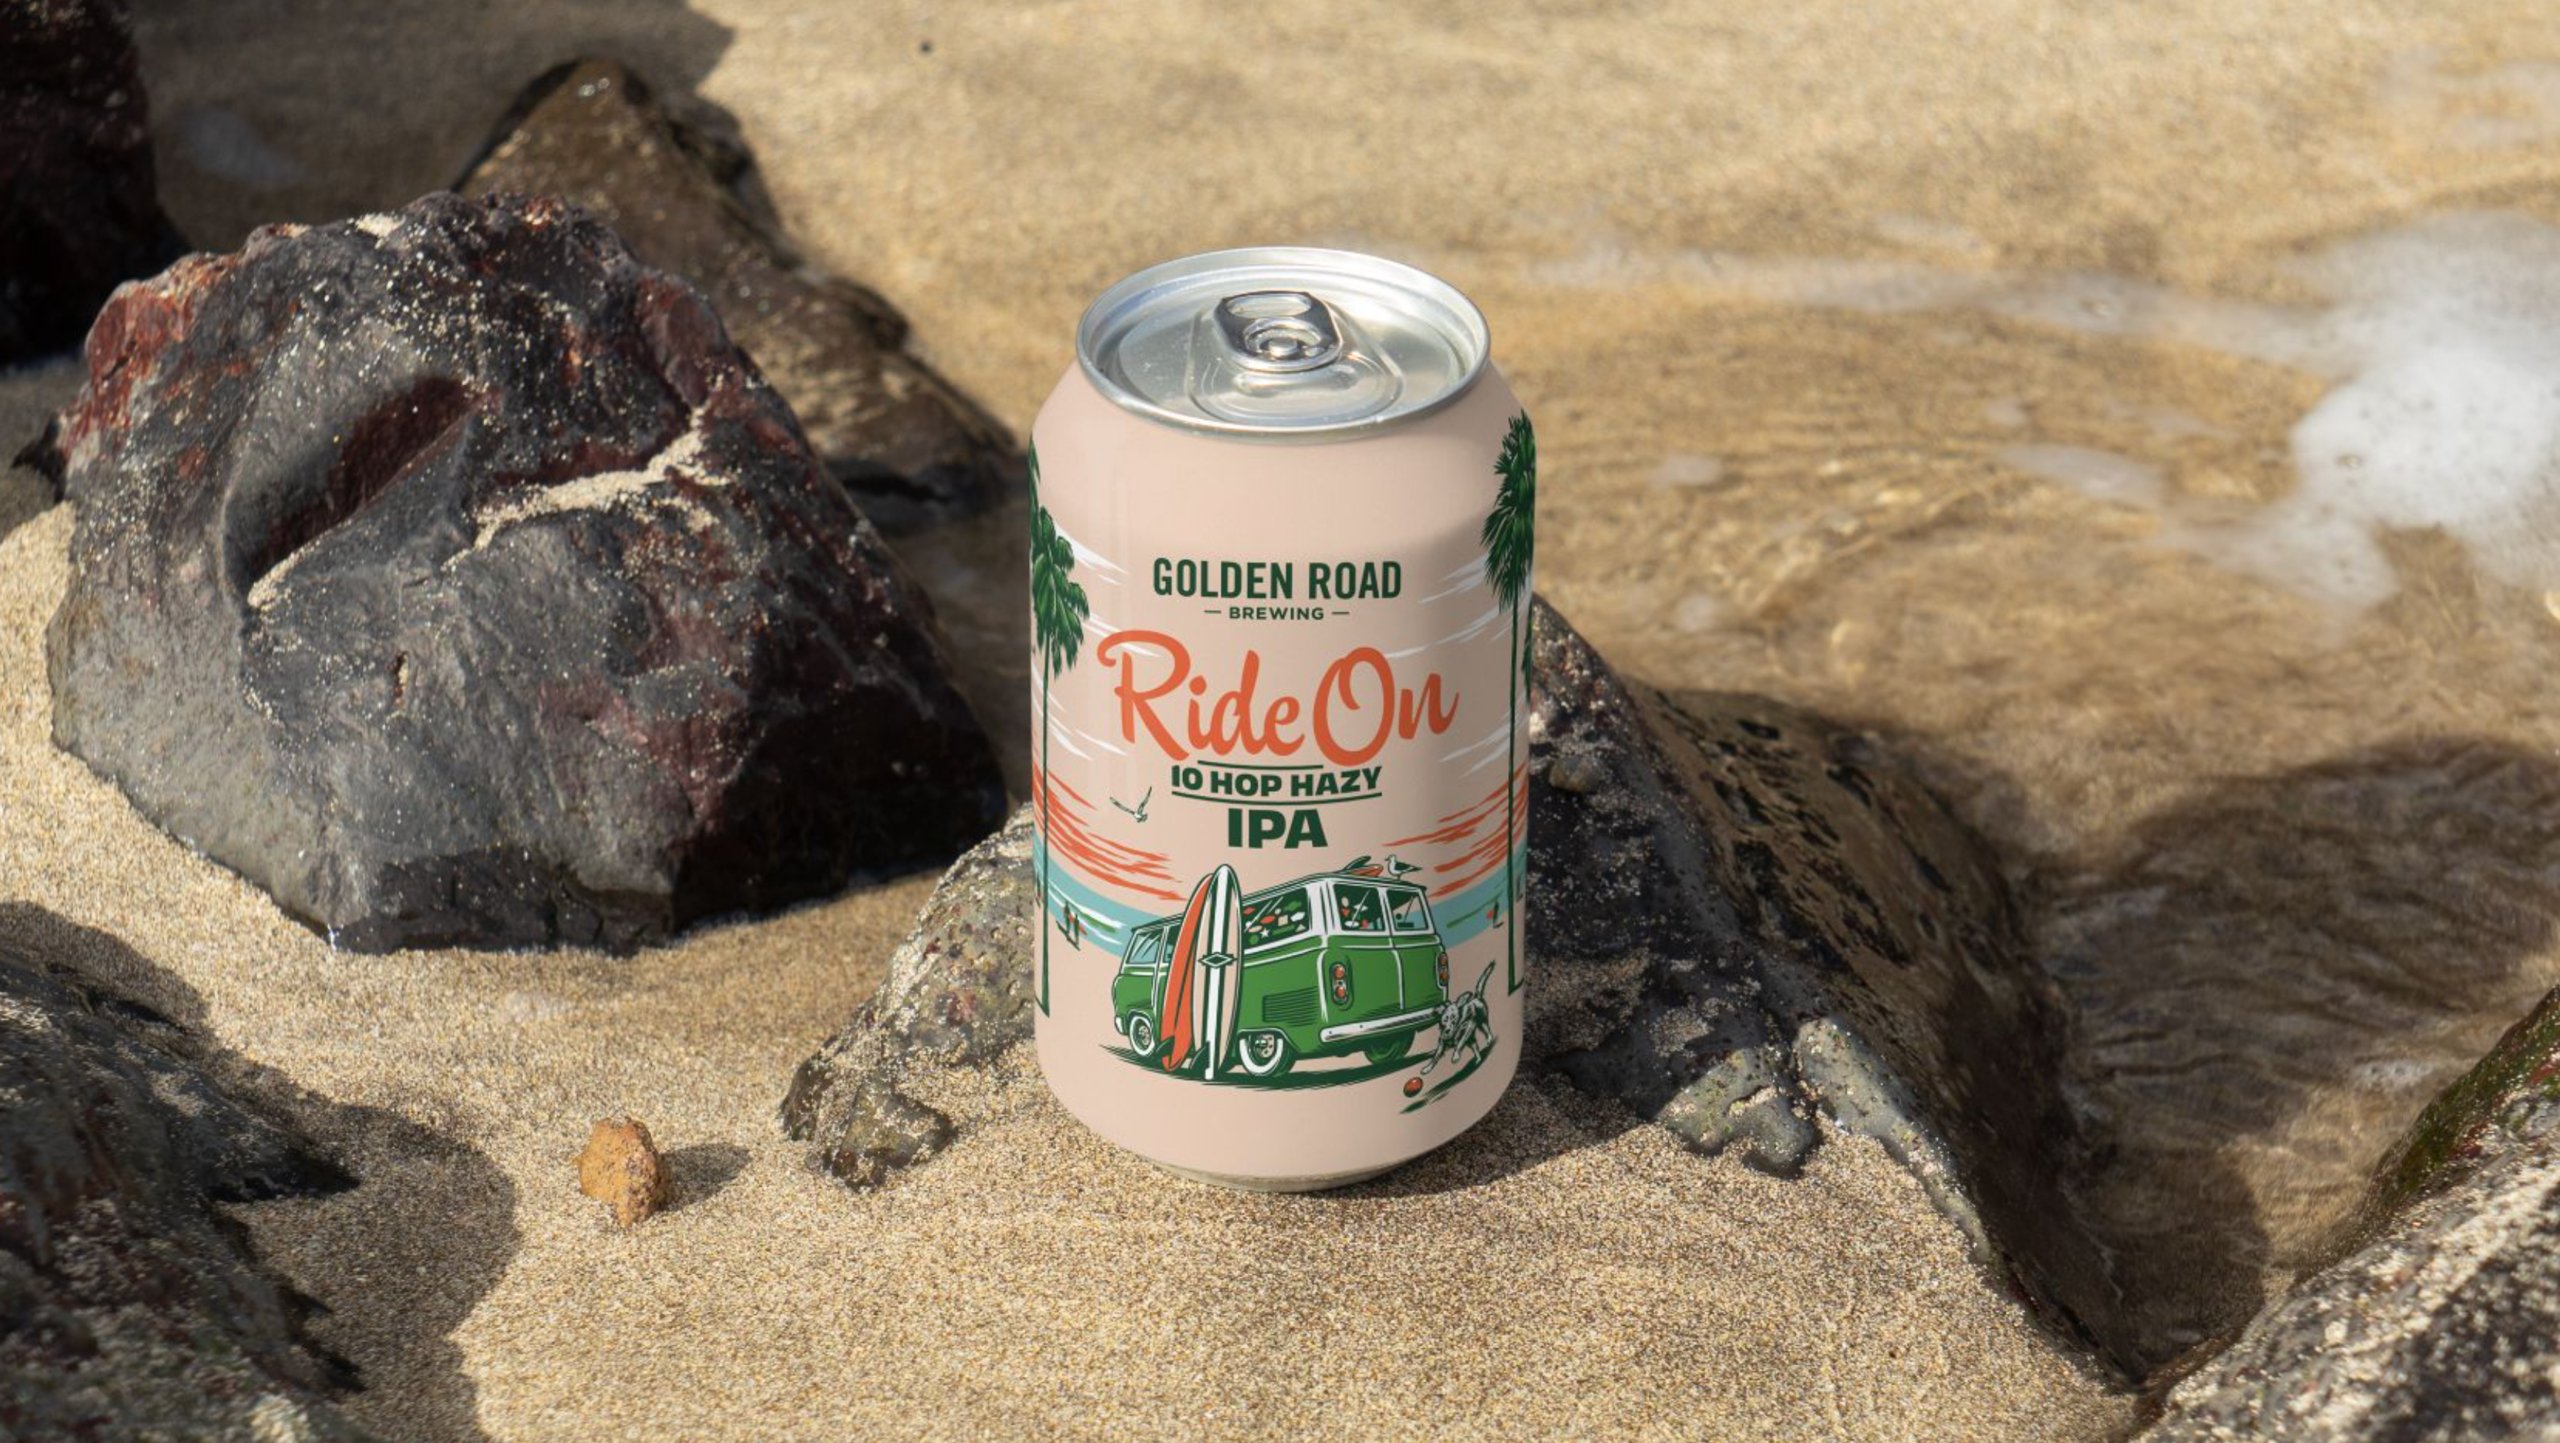 A single Golden Road beer can sits on a sandy beach against the rocks. The can is light pink with a charming illustration showing a green vintage van, surfboards leaning against it, and a cute dog chasing a ball in the foreground. The beer name is Ride On 10 Hop Hazy IPA, which is seen in playful pink script and dark green block letters.